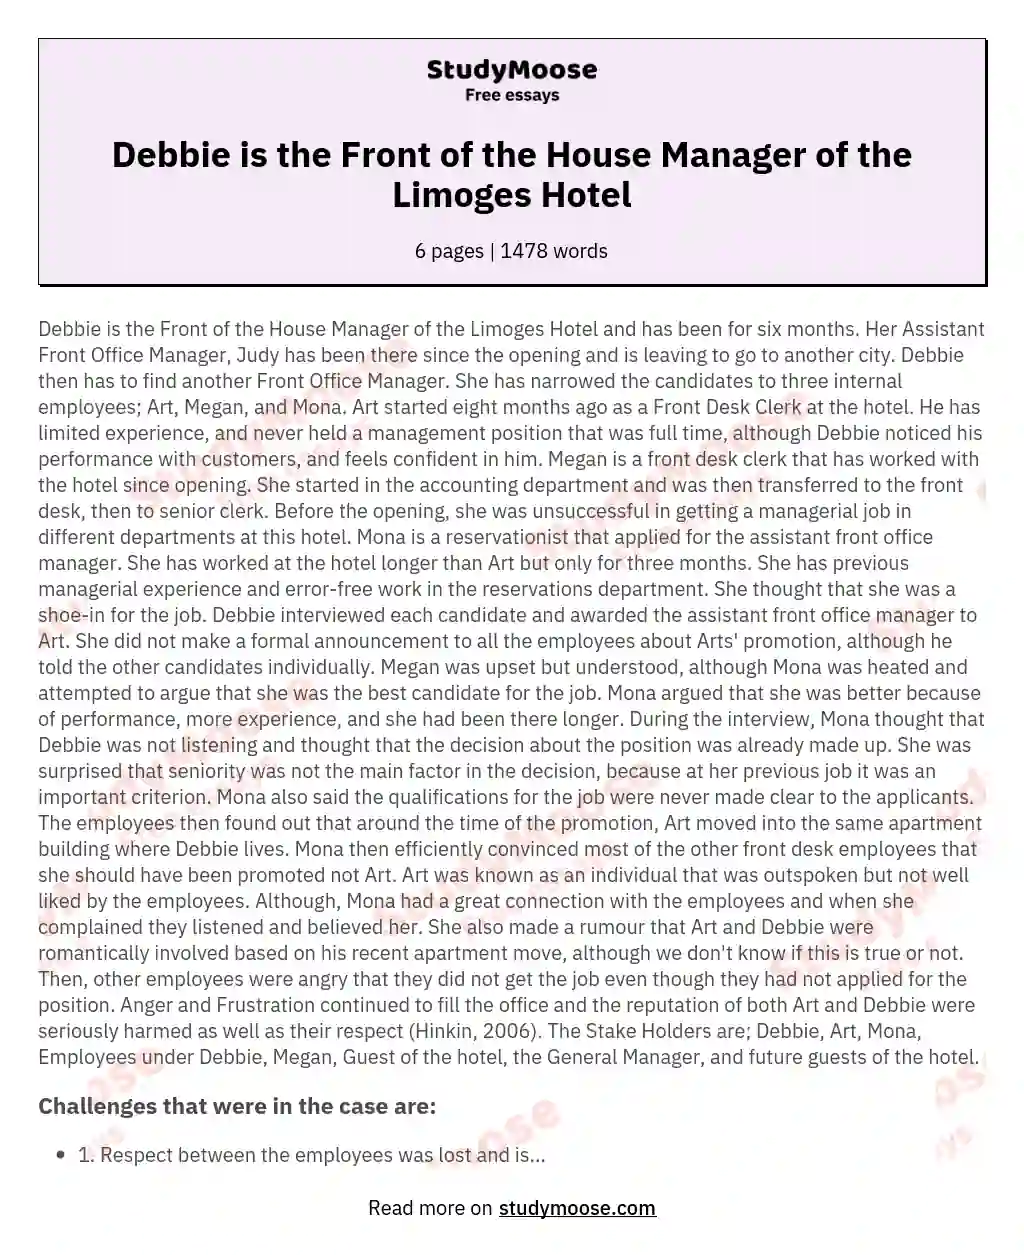 Debbie is the Front of the House Manager of the Limoges Hotel essay